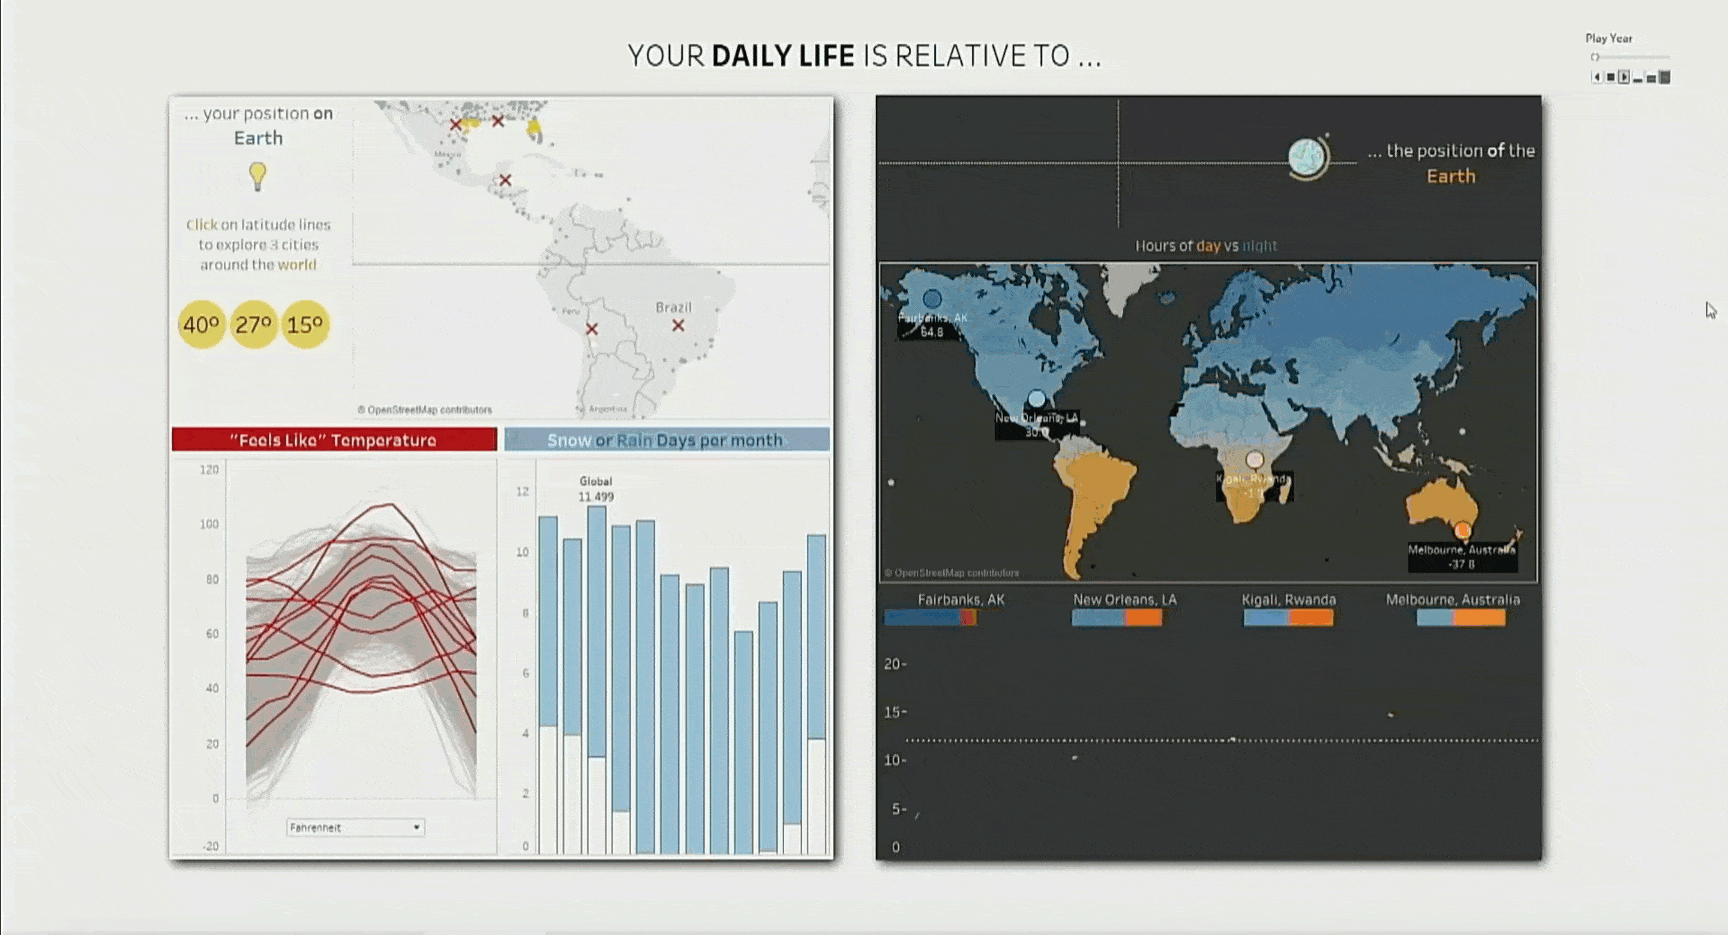 Timothy Vermeiren's viz showed us how daily life is relative to location at TC18 Iron Viz